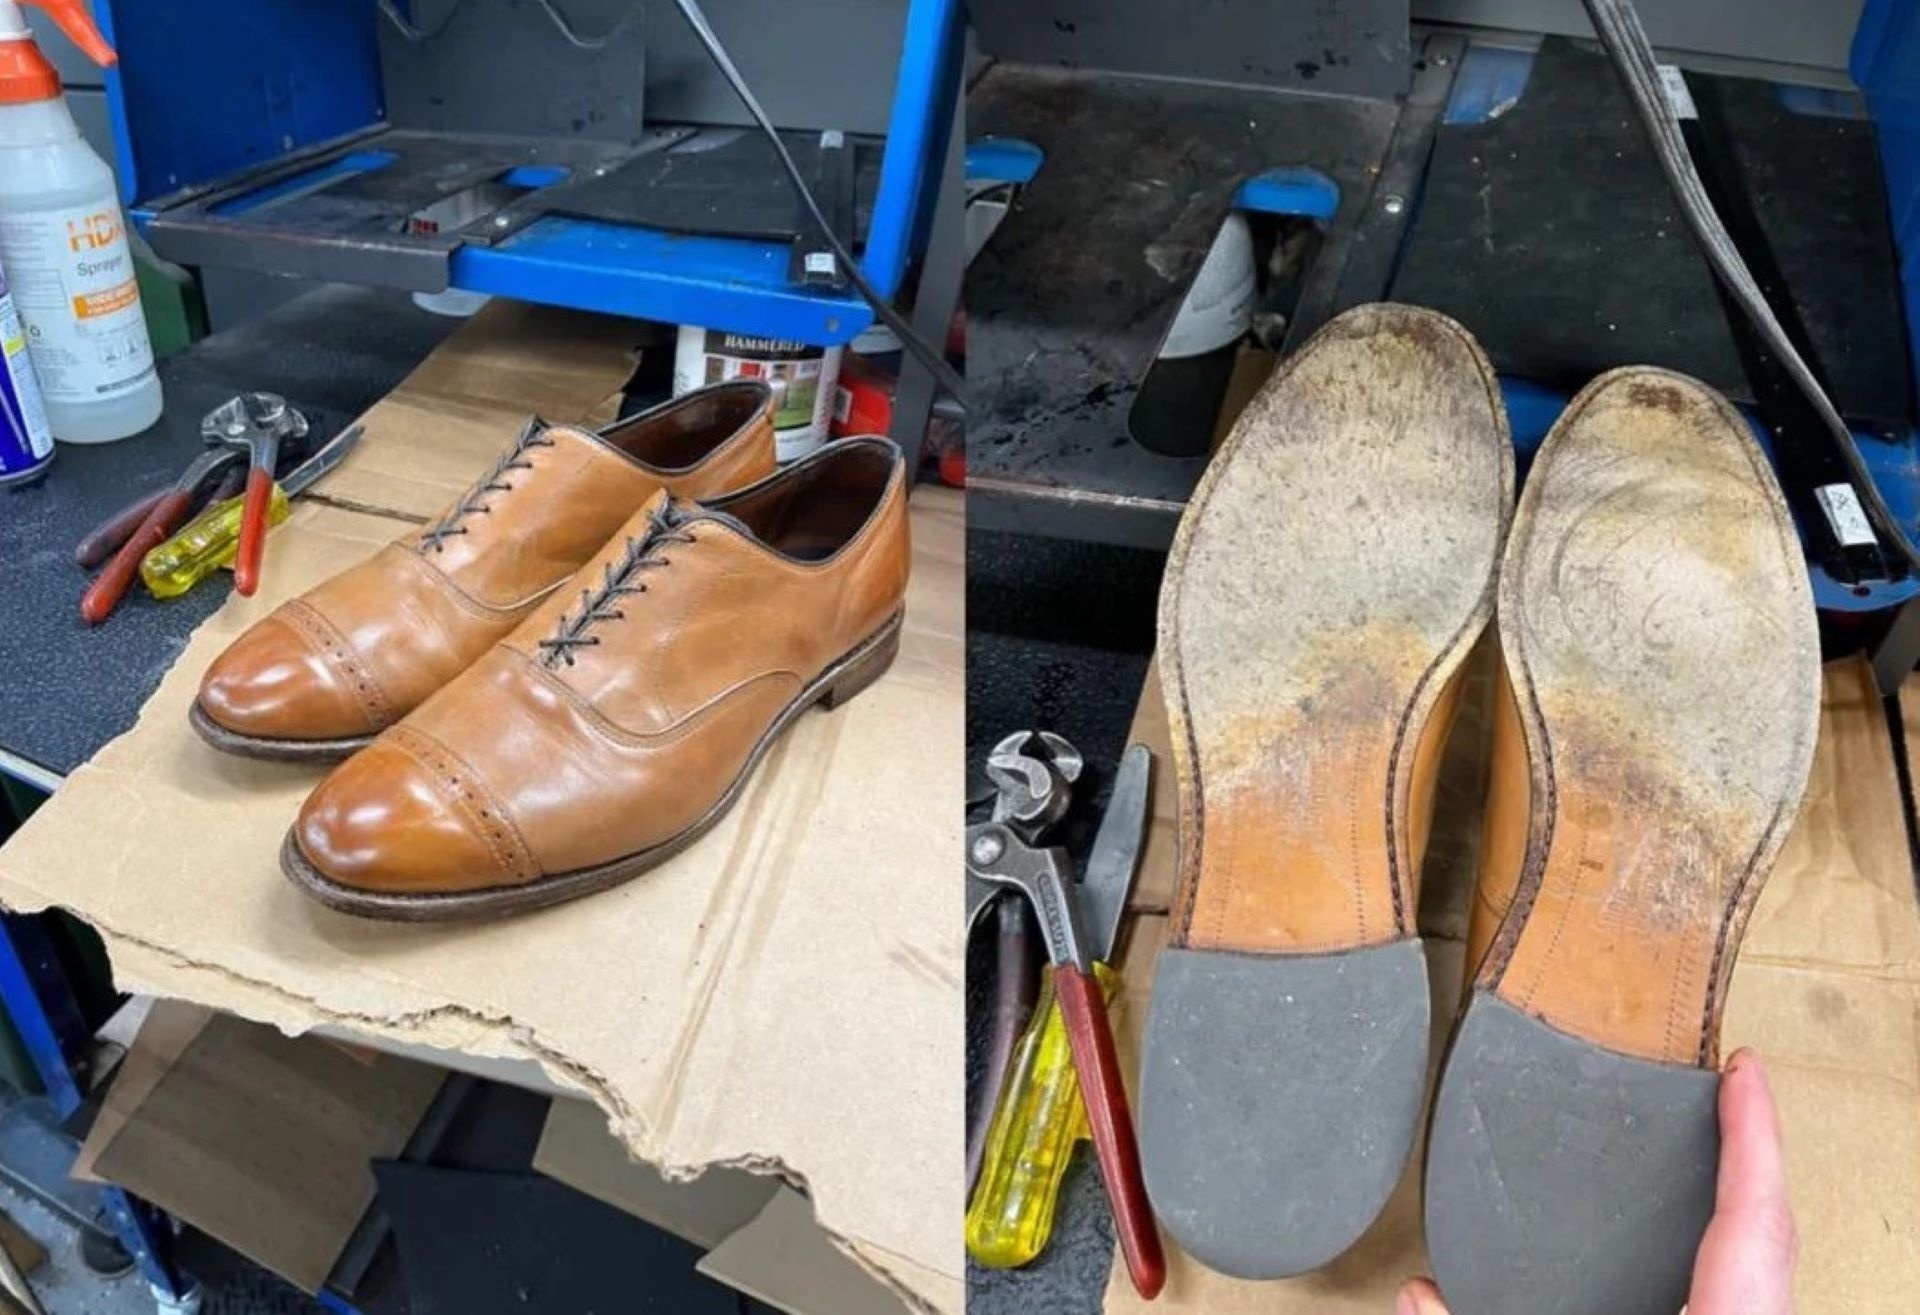 Redditor revives 'criminally cheap' leather shoes at home